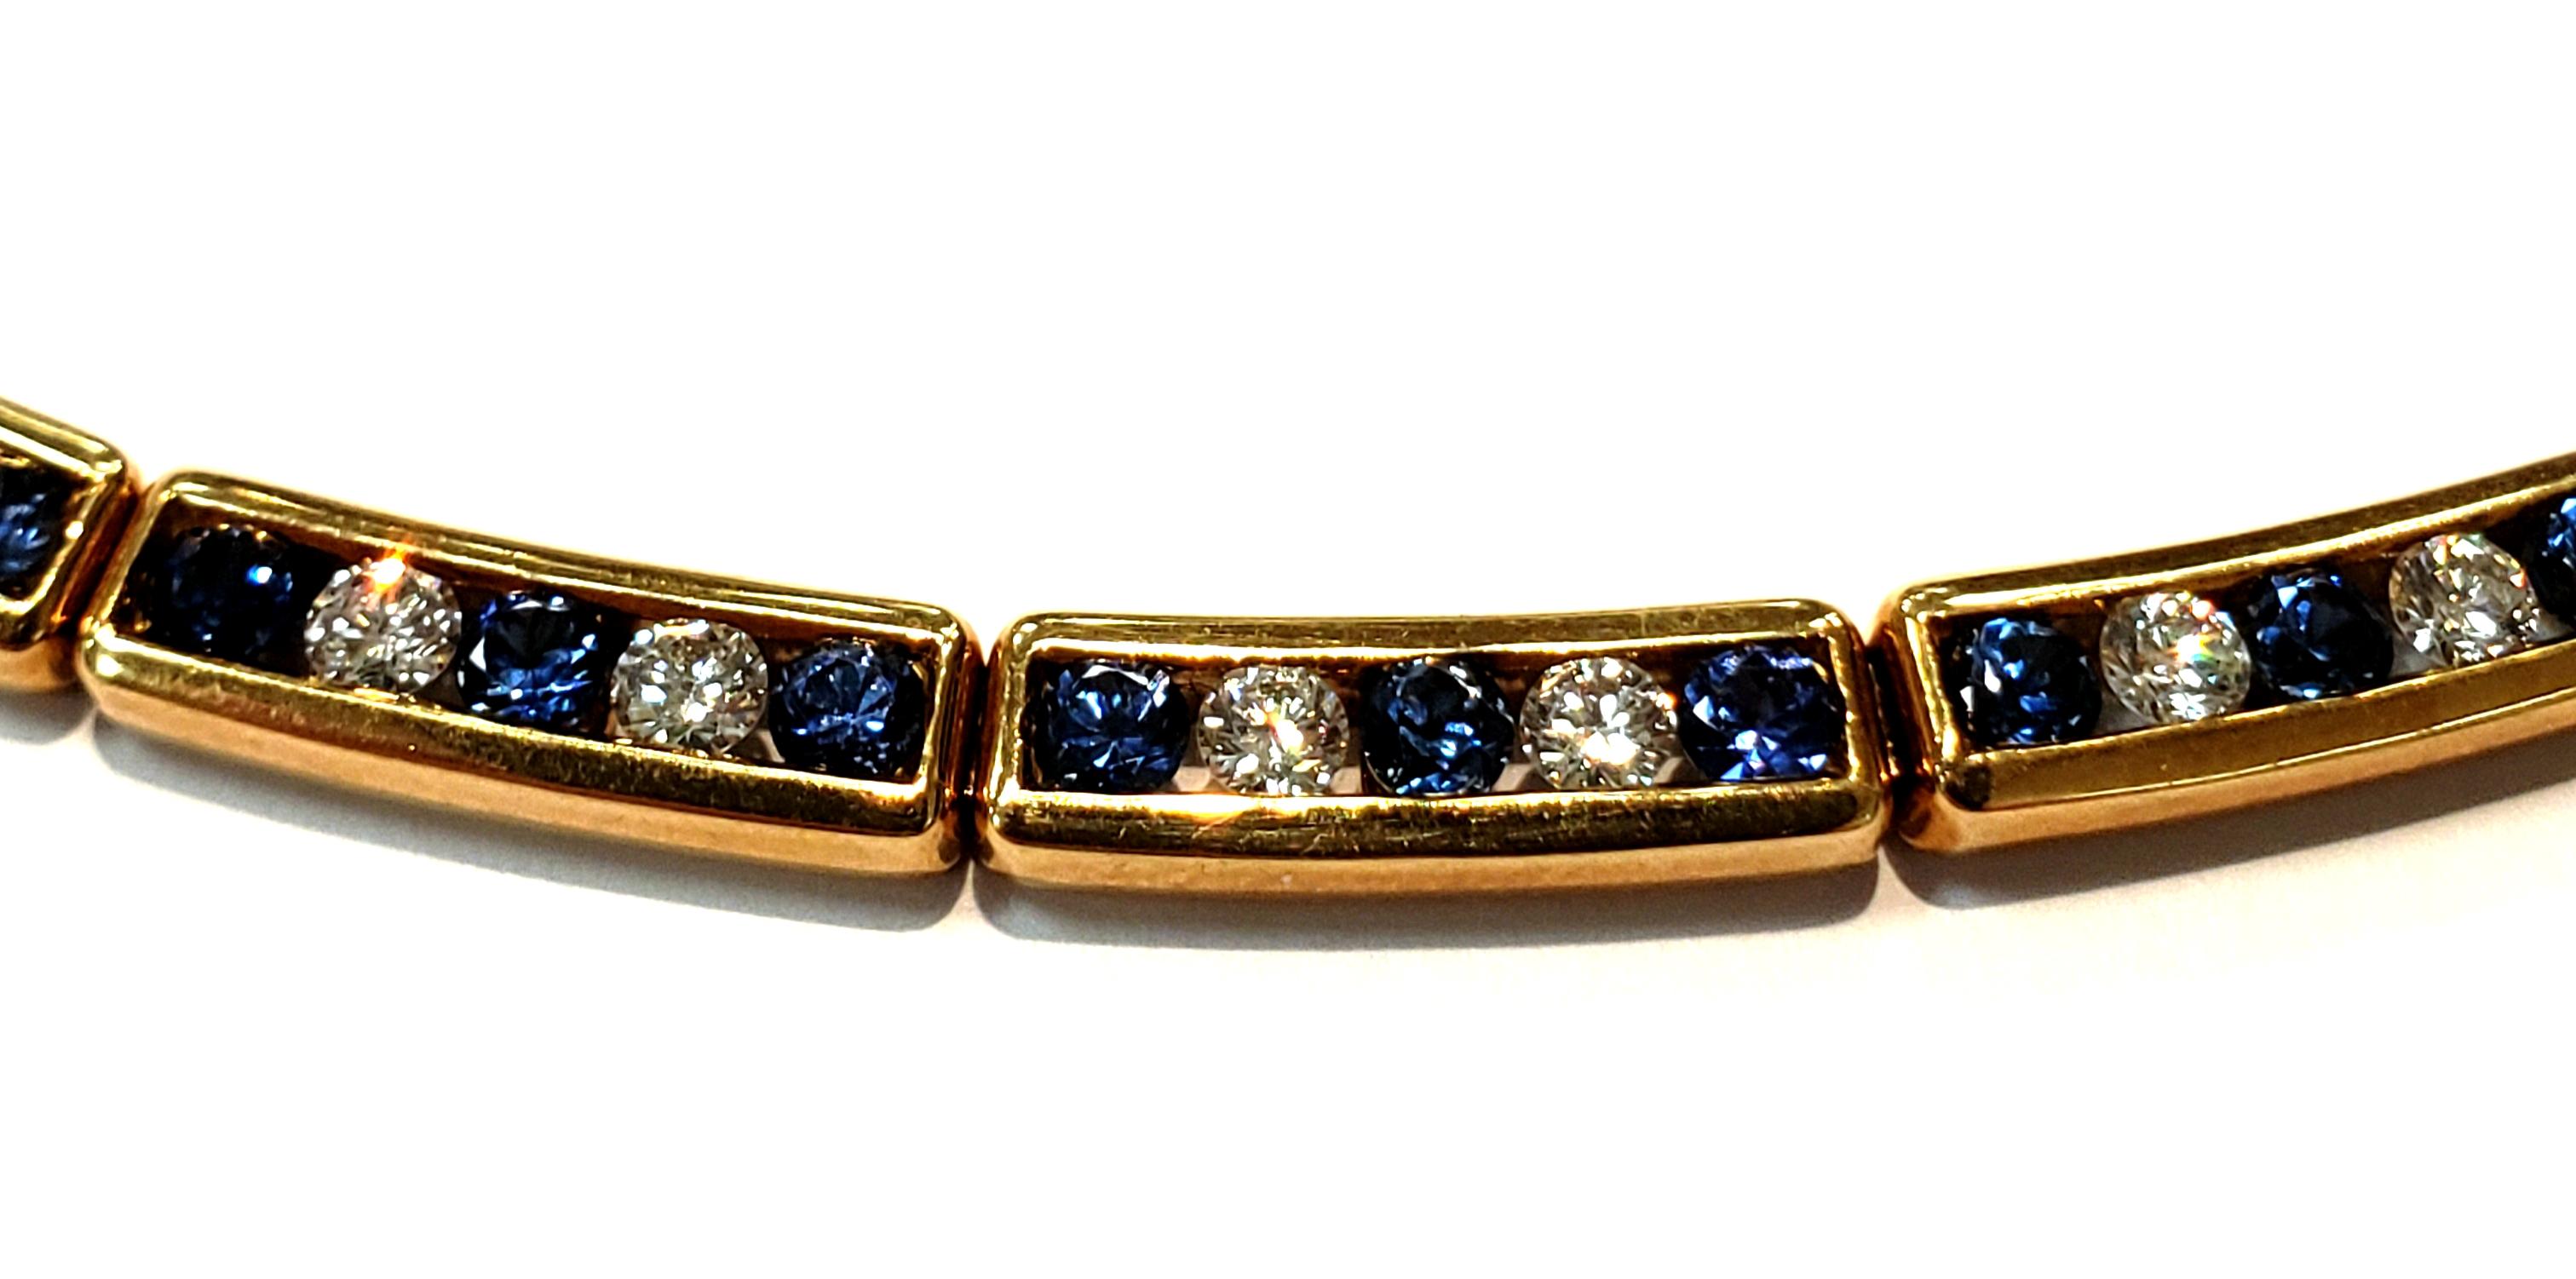 A Rare Beauty! 18 Karat Yellow Gold Open Link Choker Necklace, With Five Sections, Each Containing 3 Round Natural Blue Sapphires & Two Round Brilliant Diamonds, Channel Set In Rectangular Links. Choker is 16 Inches, & Has A Closed Clasp Design. 10